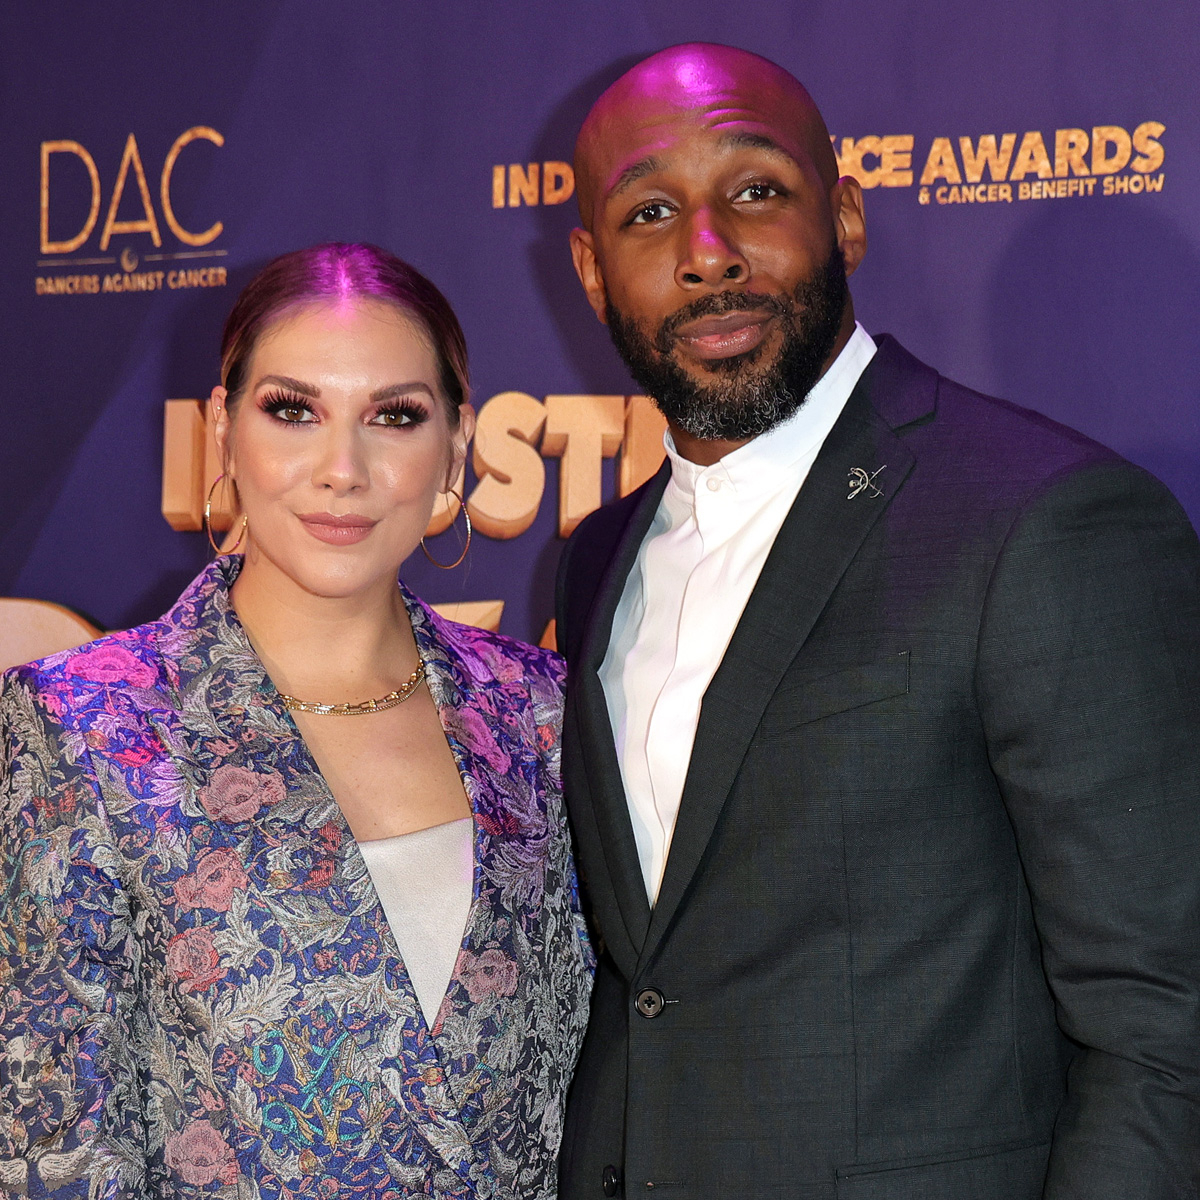 Allison Holker Honors “Superman” Stephen “tWitch” Boss After Memorial